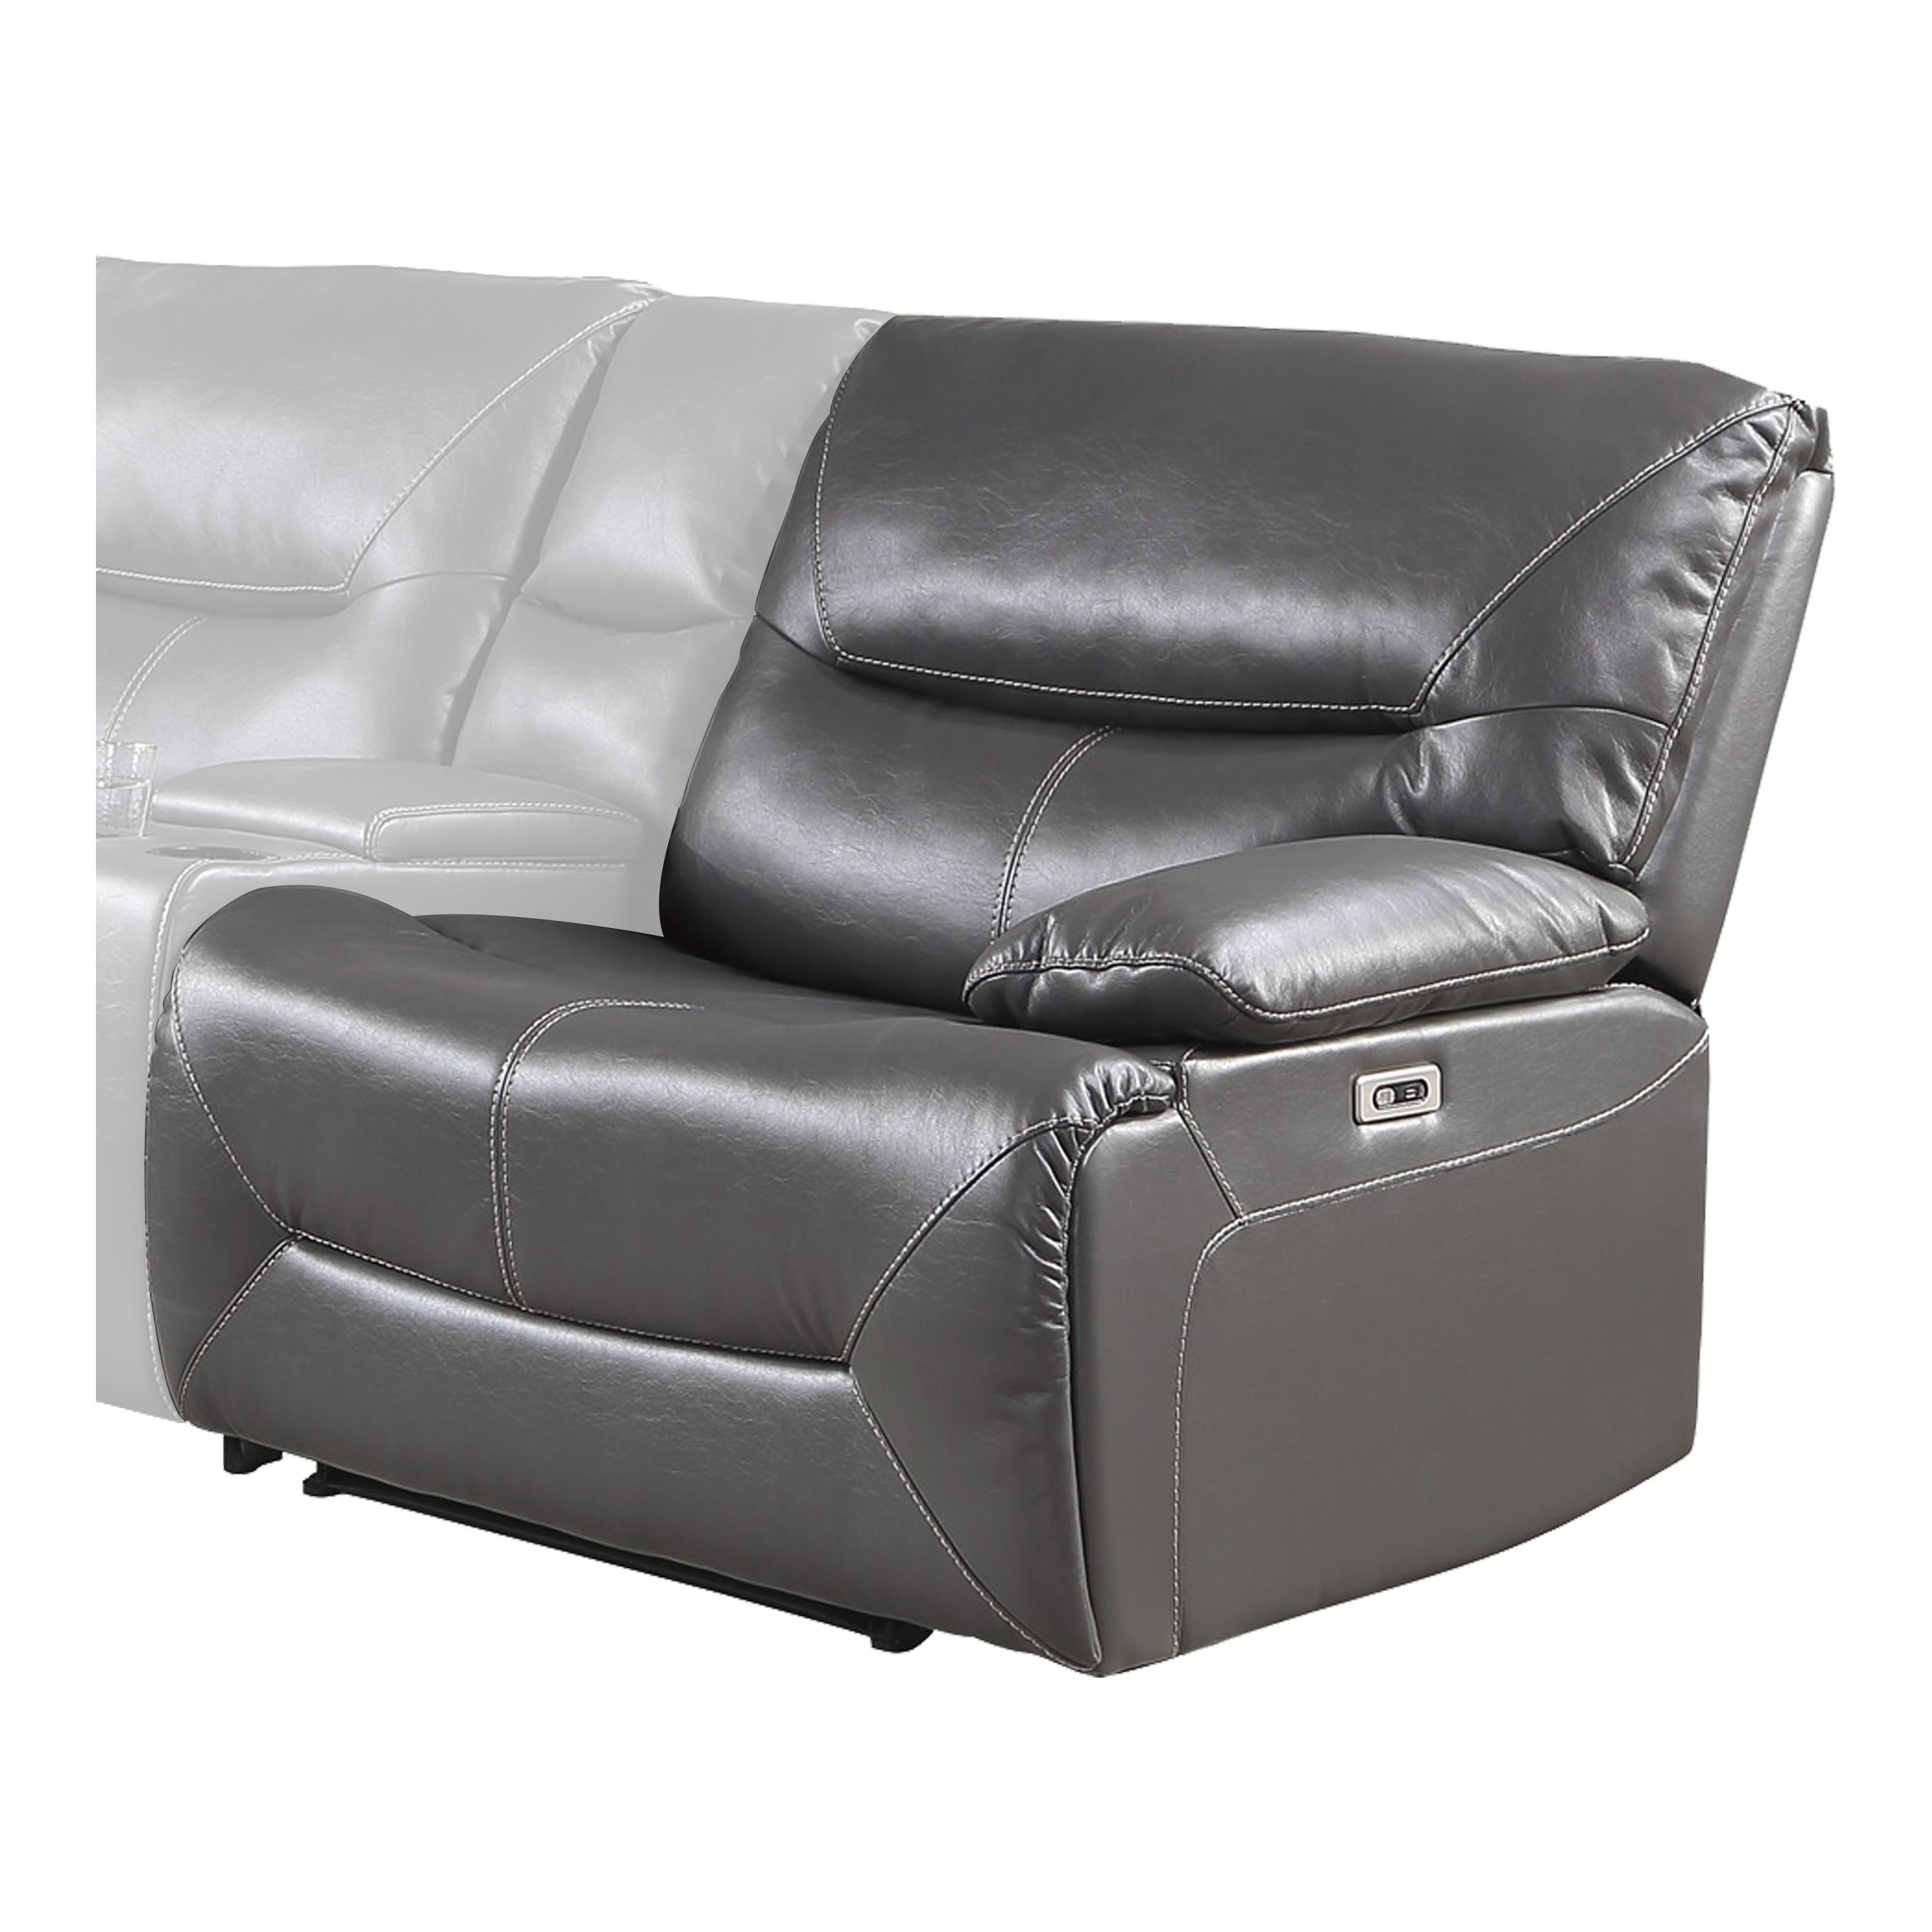 Transitional Power Reclining Chair 9579GRY-RRPW Dyersburg 9579GRY-RRPW in Gray Faux Leather